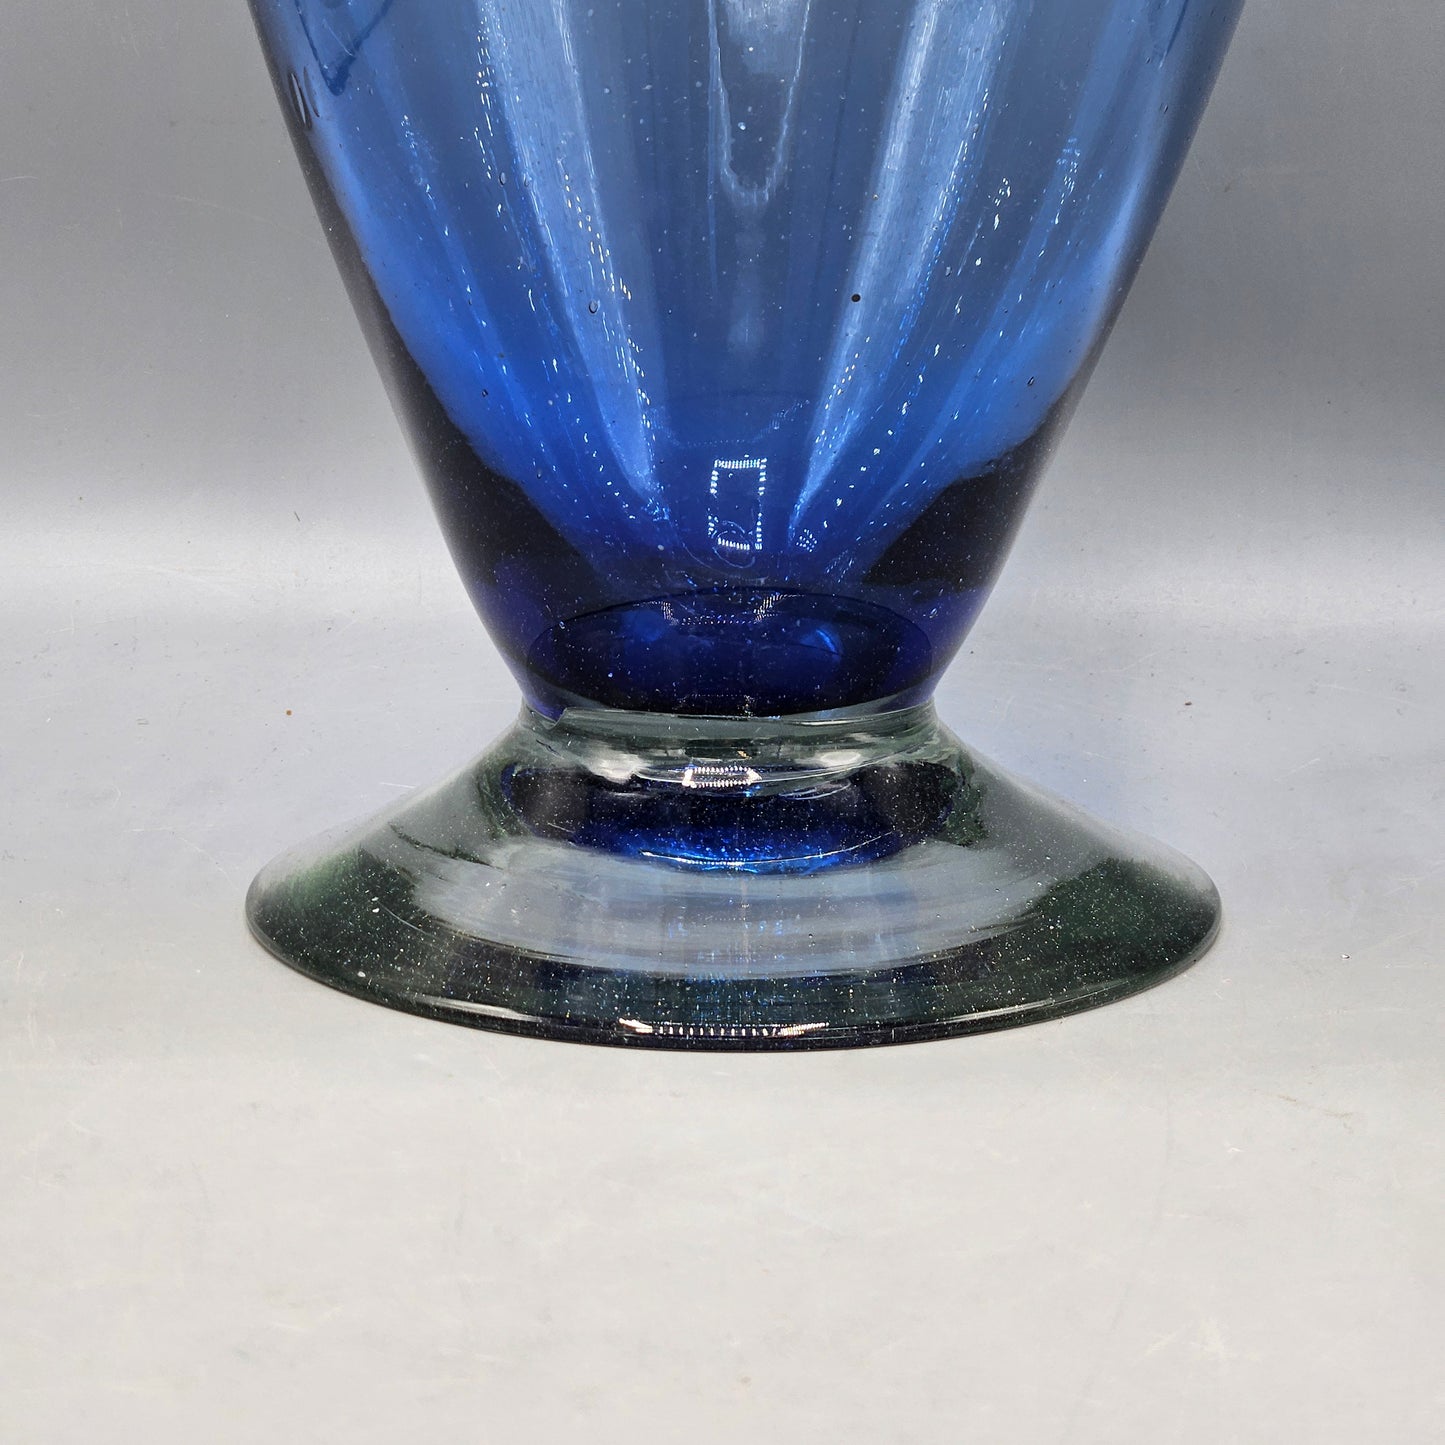 Large Handblown Blue Glass Vase with Handles